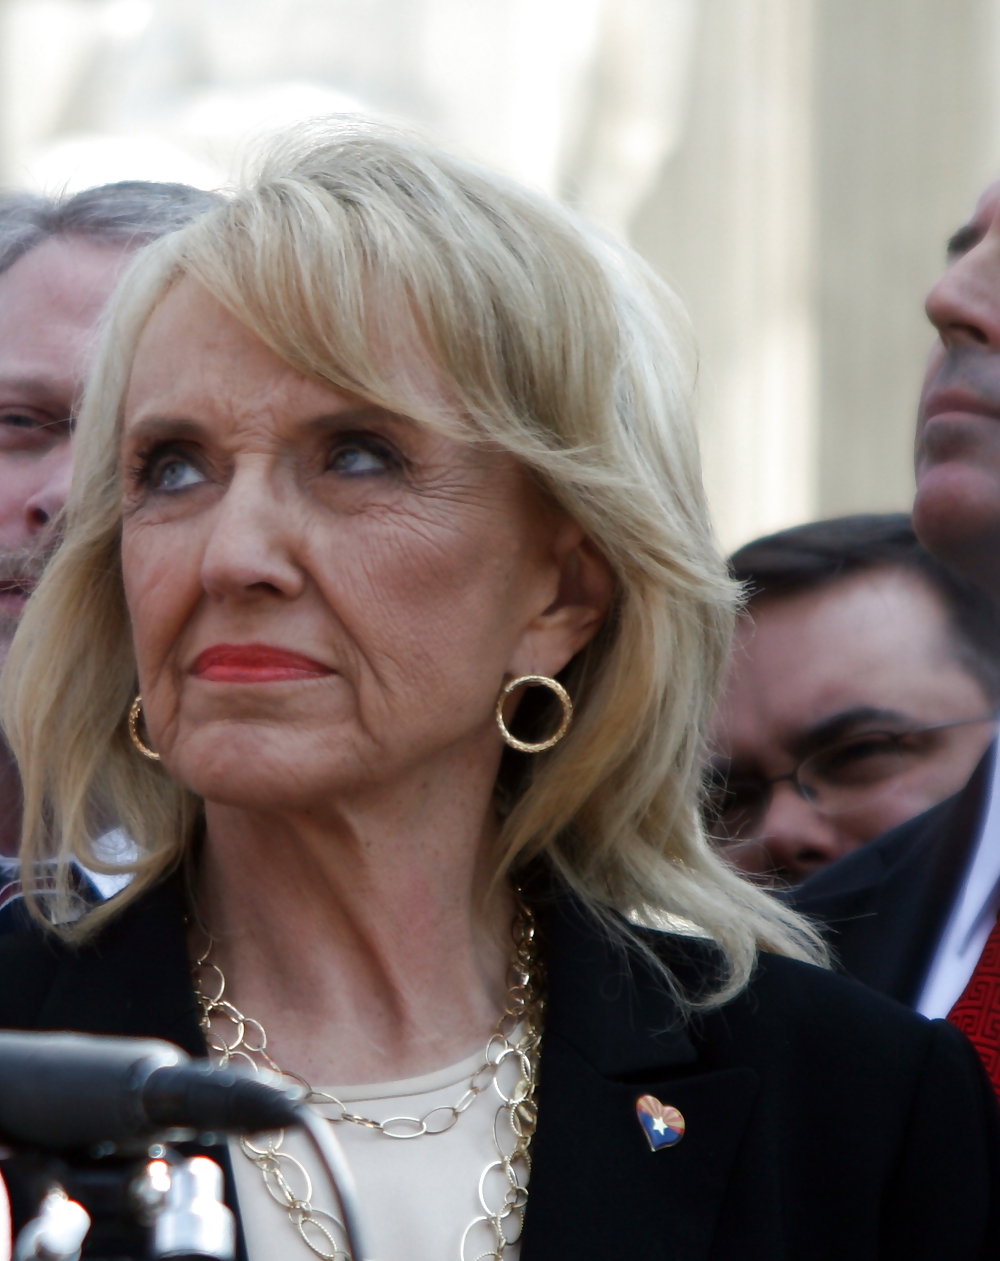 I really love jerking off to Conservative Jan Brewer #22878756